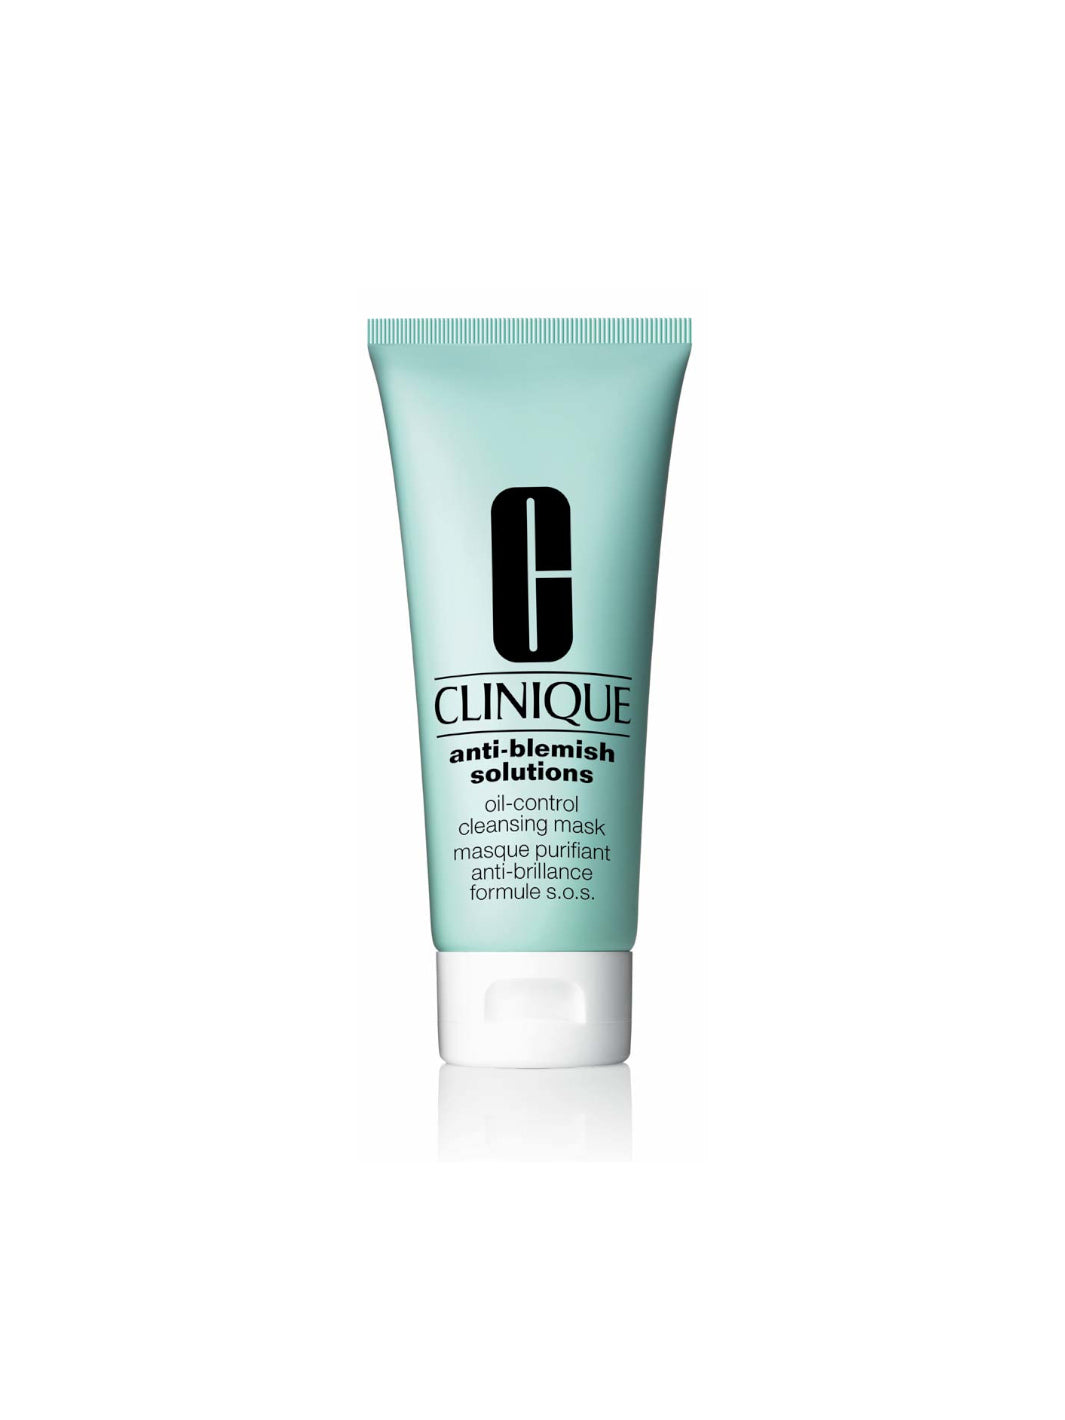 Clinique Anti blemish solutions oil control cleansing mask